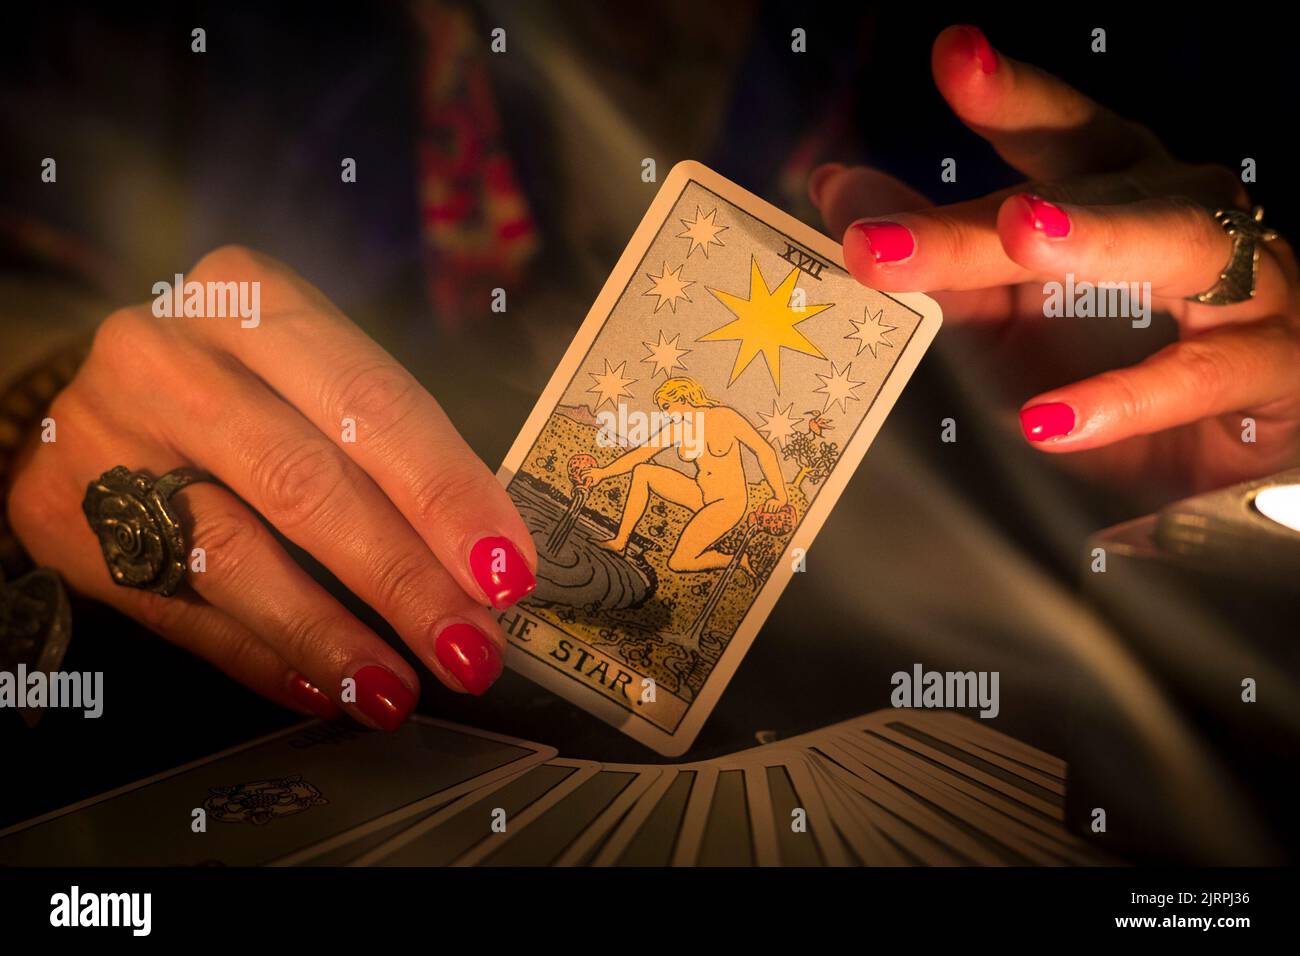 Fortune teller female hands showing The Star tarot card, symbol of hope, during a reading. Close-up with candle light and smoke, moody atmosphere. Stock Photo